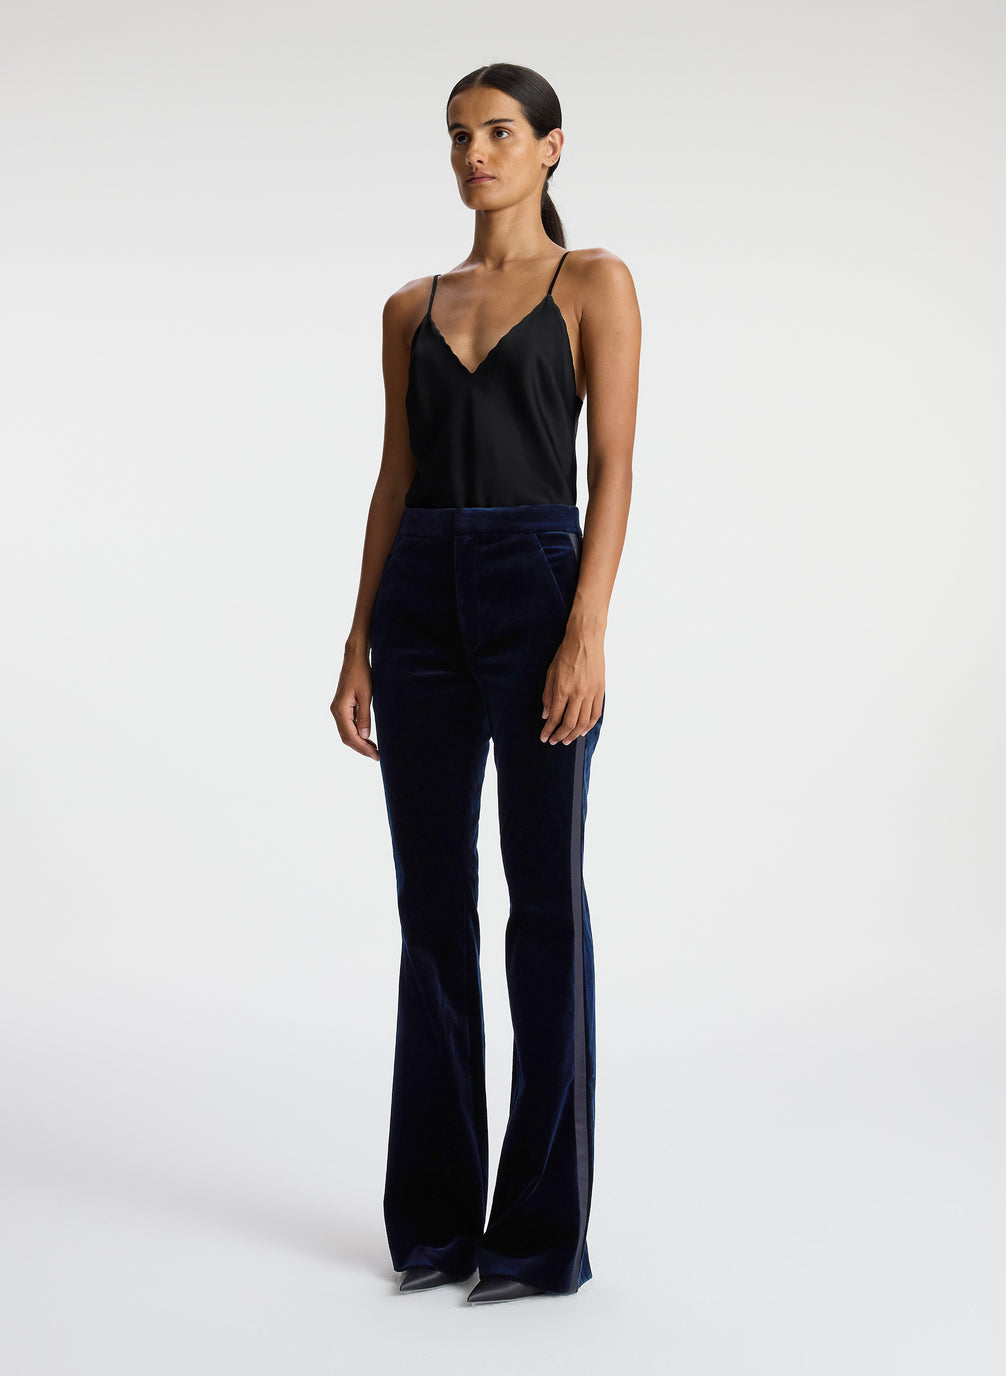 side view of woman wearing black satin camisole and navy blue velvet flared tuxedo pants